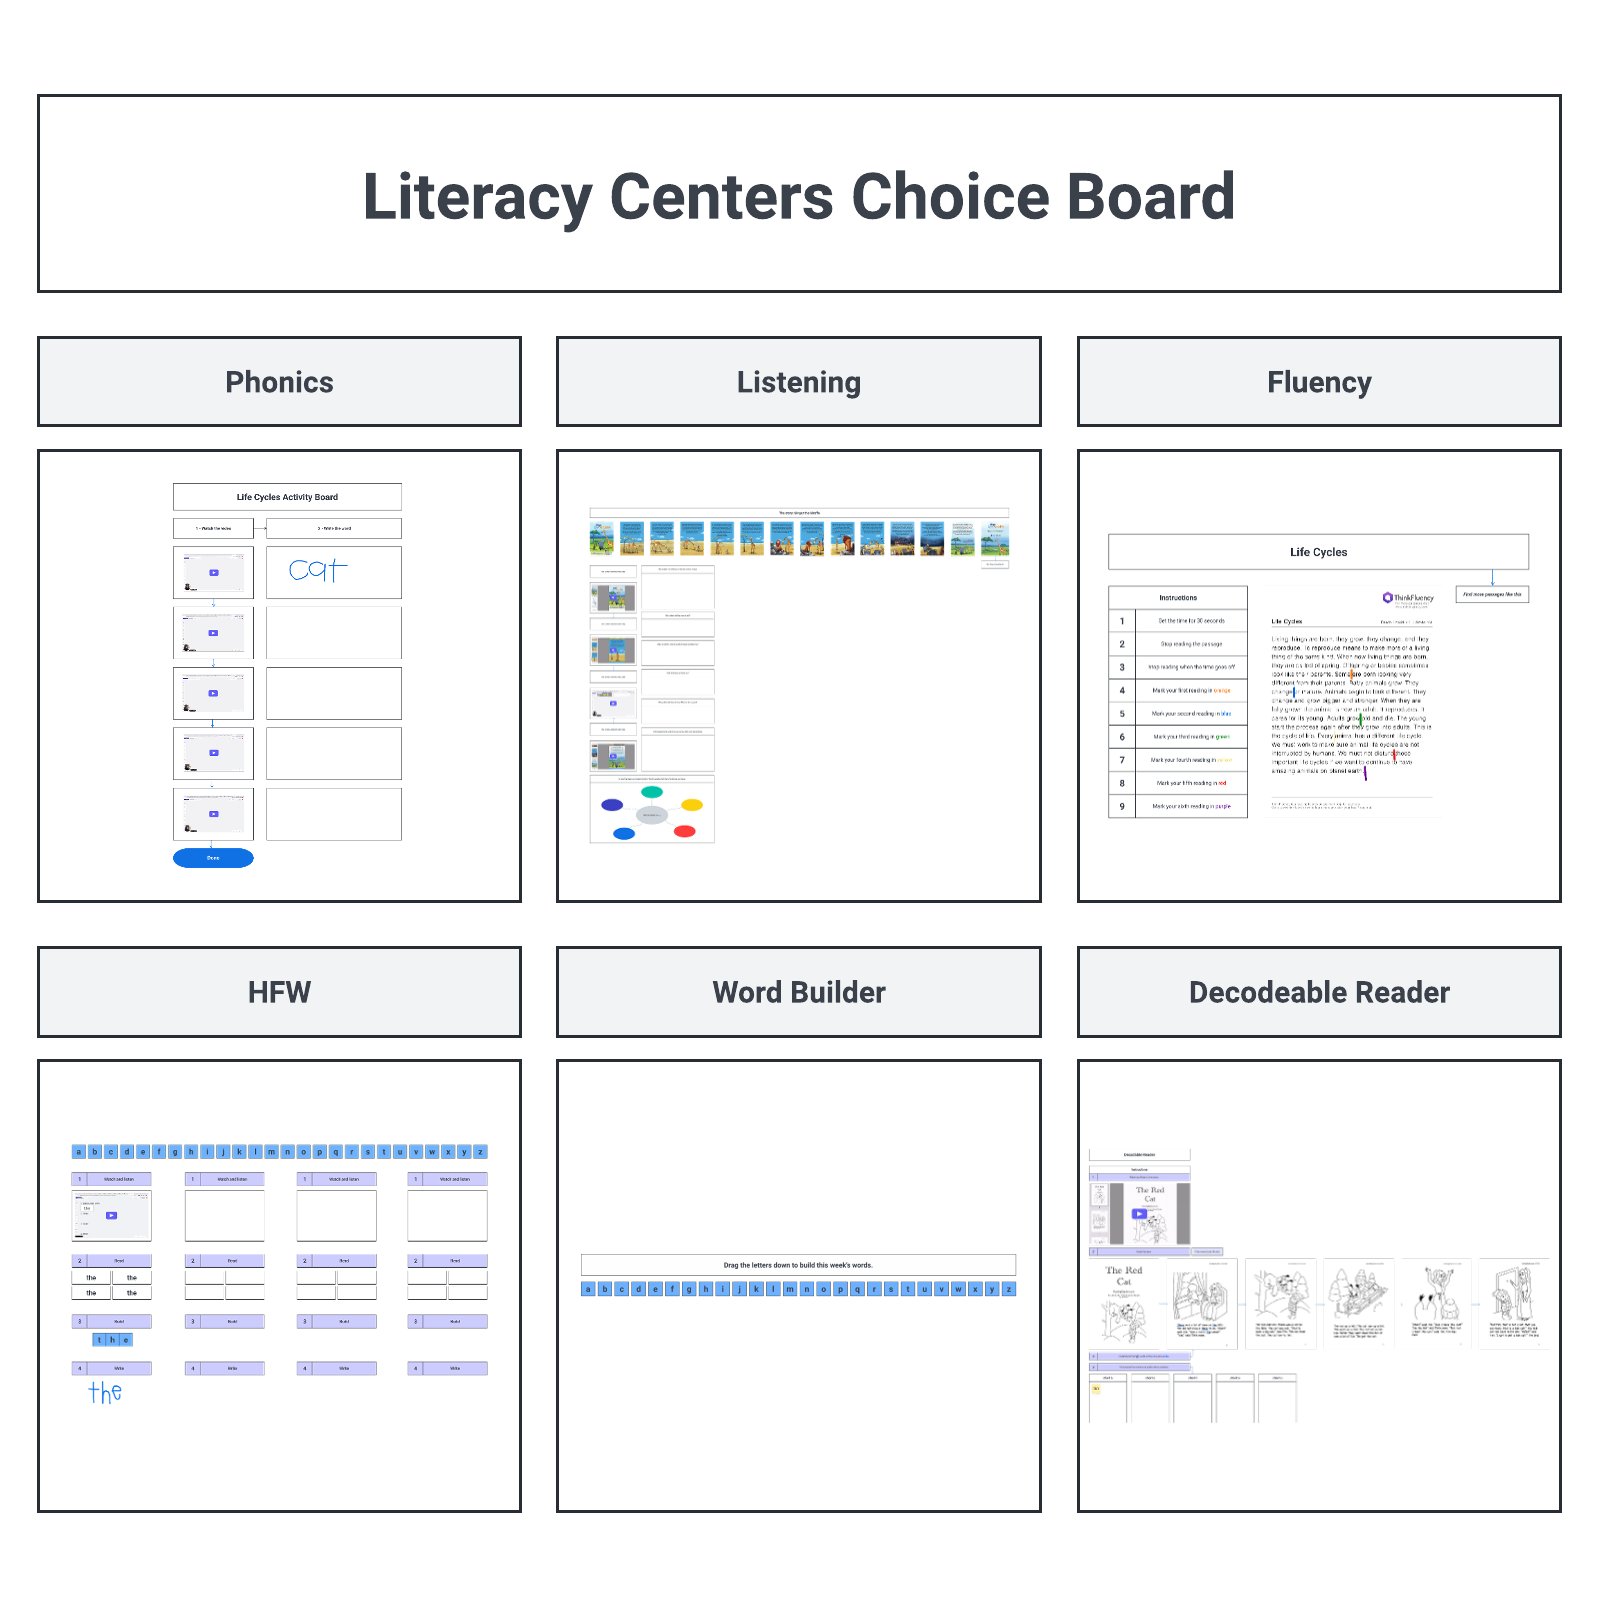 Literacy centers choice board example example